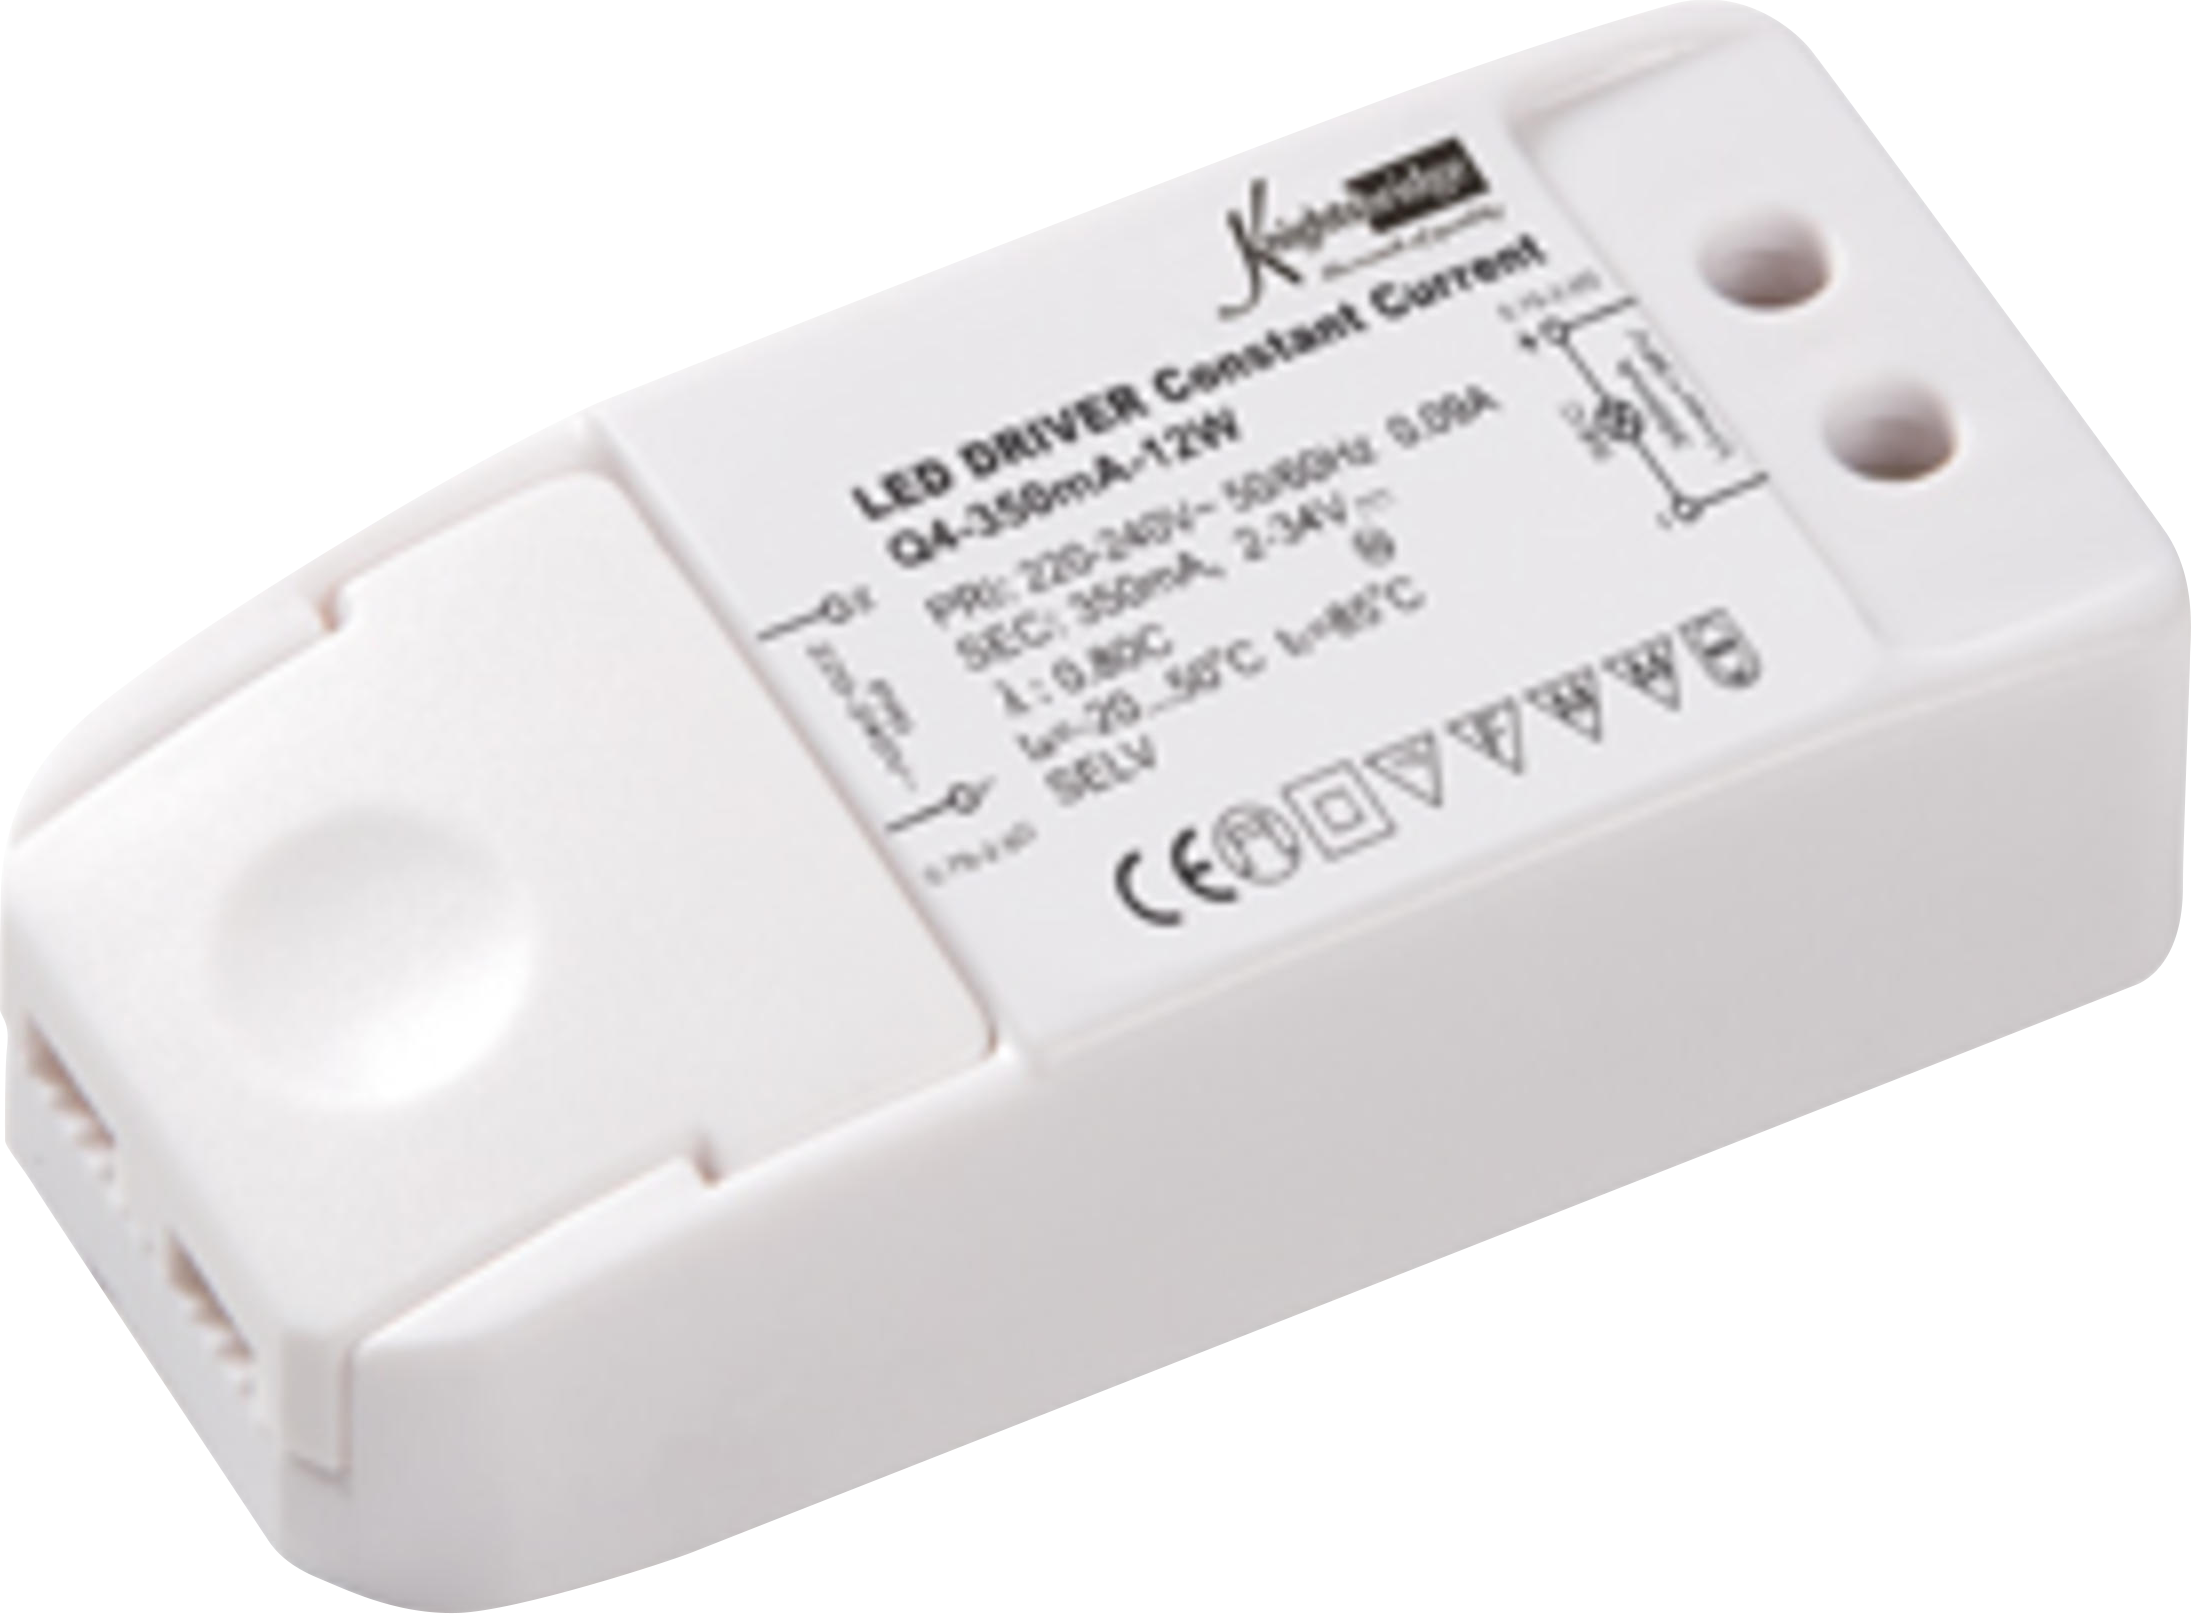 IP20 350mA 12W Constant Current LED Driver - 1W350A 